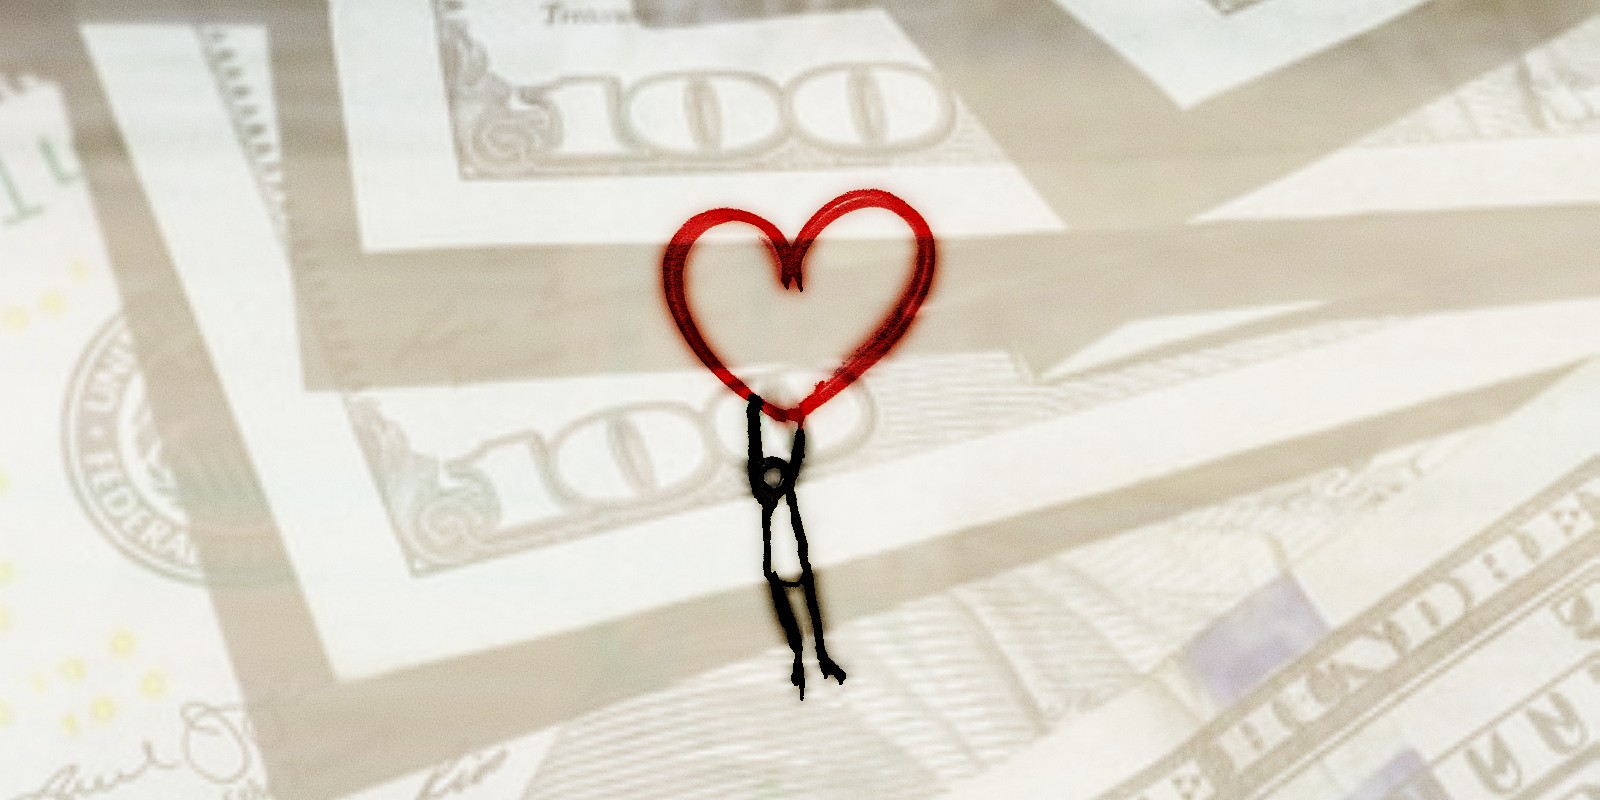 Single & penniless: FBI warns of $475M lost to romance scams